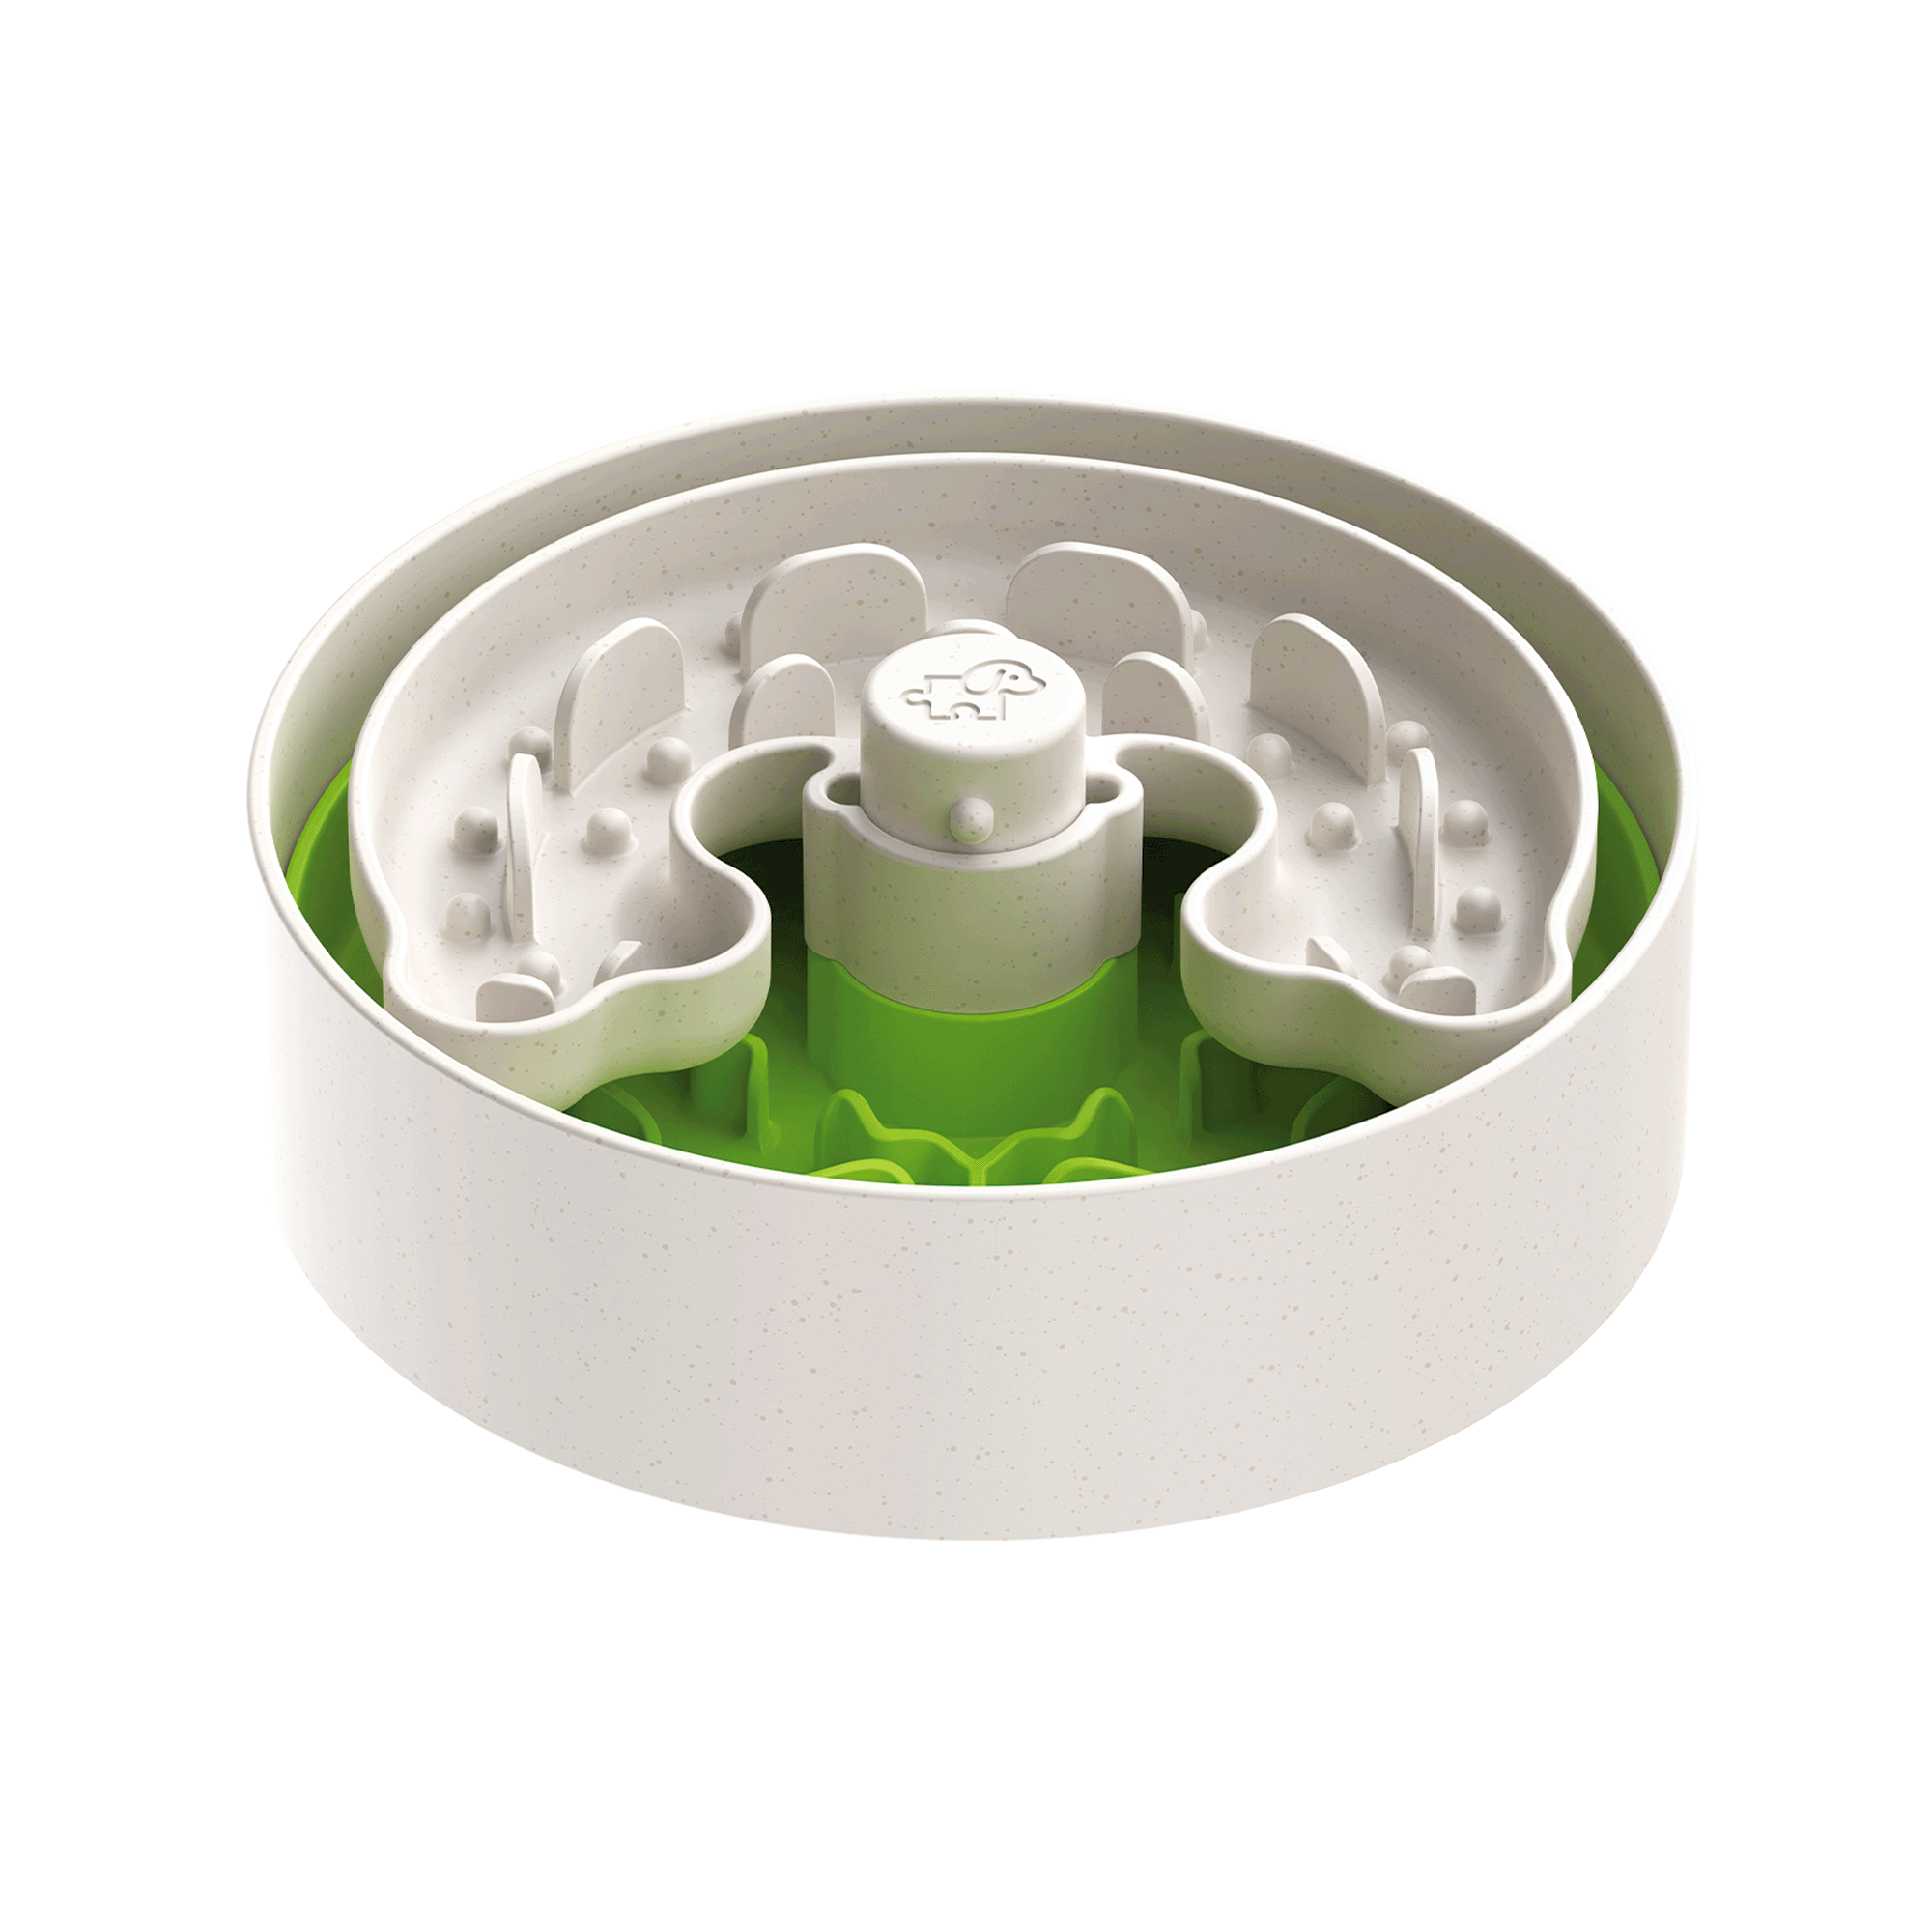 Puzzle Feeder™ / Dog Bowl for Eating Habit Training (Lawn-Green)